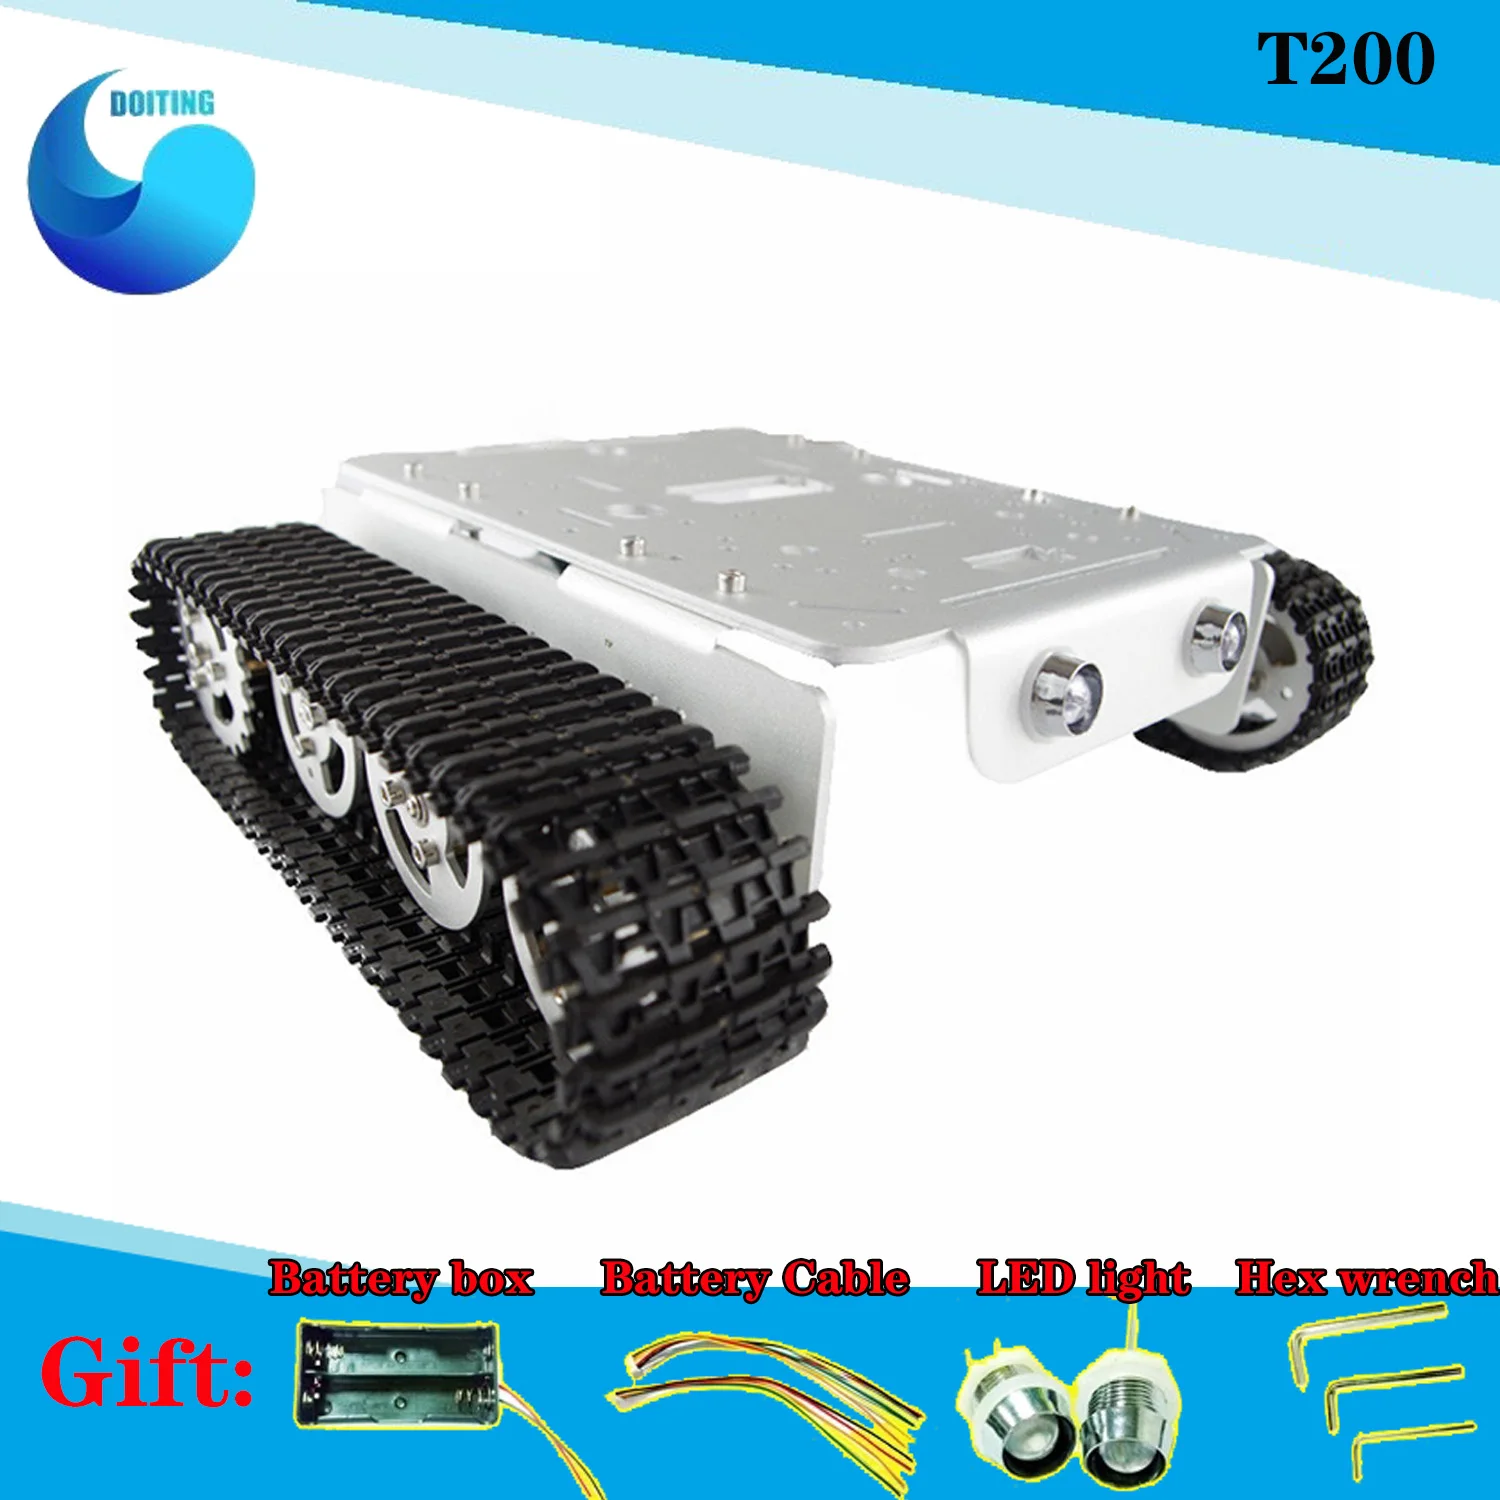 Enlarge DOIT TD200 Metal Tank Chassis Robot Model Intelligent Car with Solid Structure 2 Motor Plastic Tracks Electronic Contest